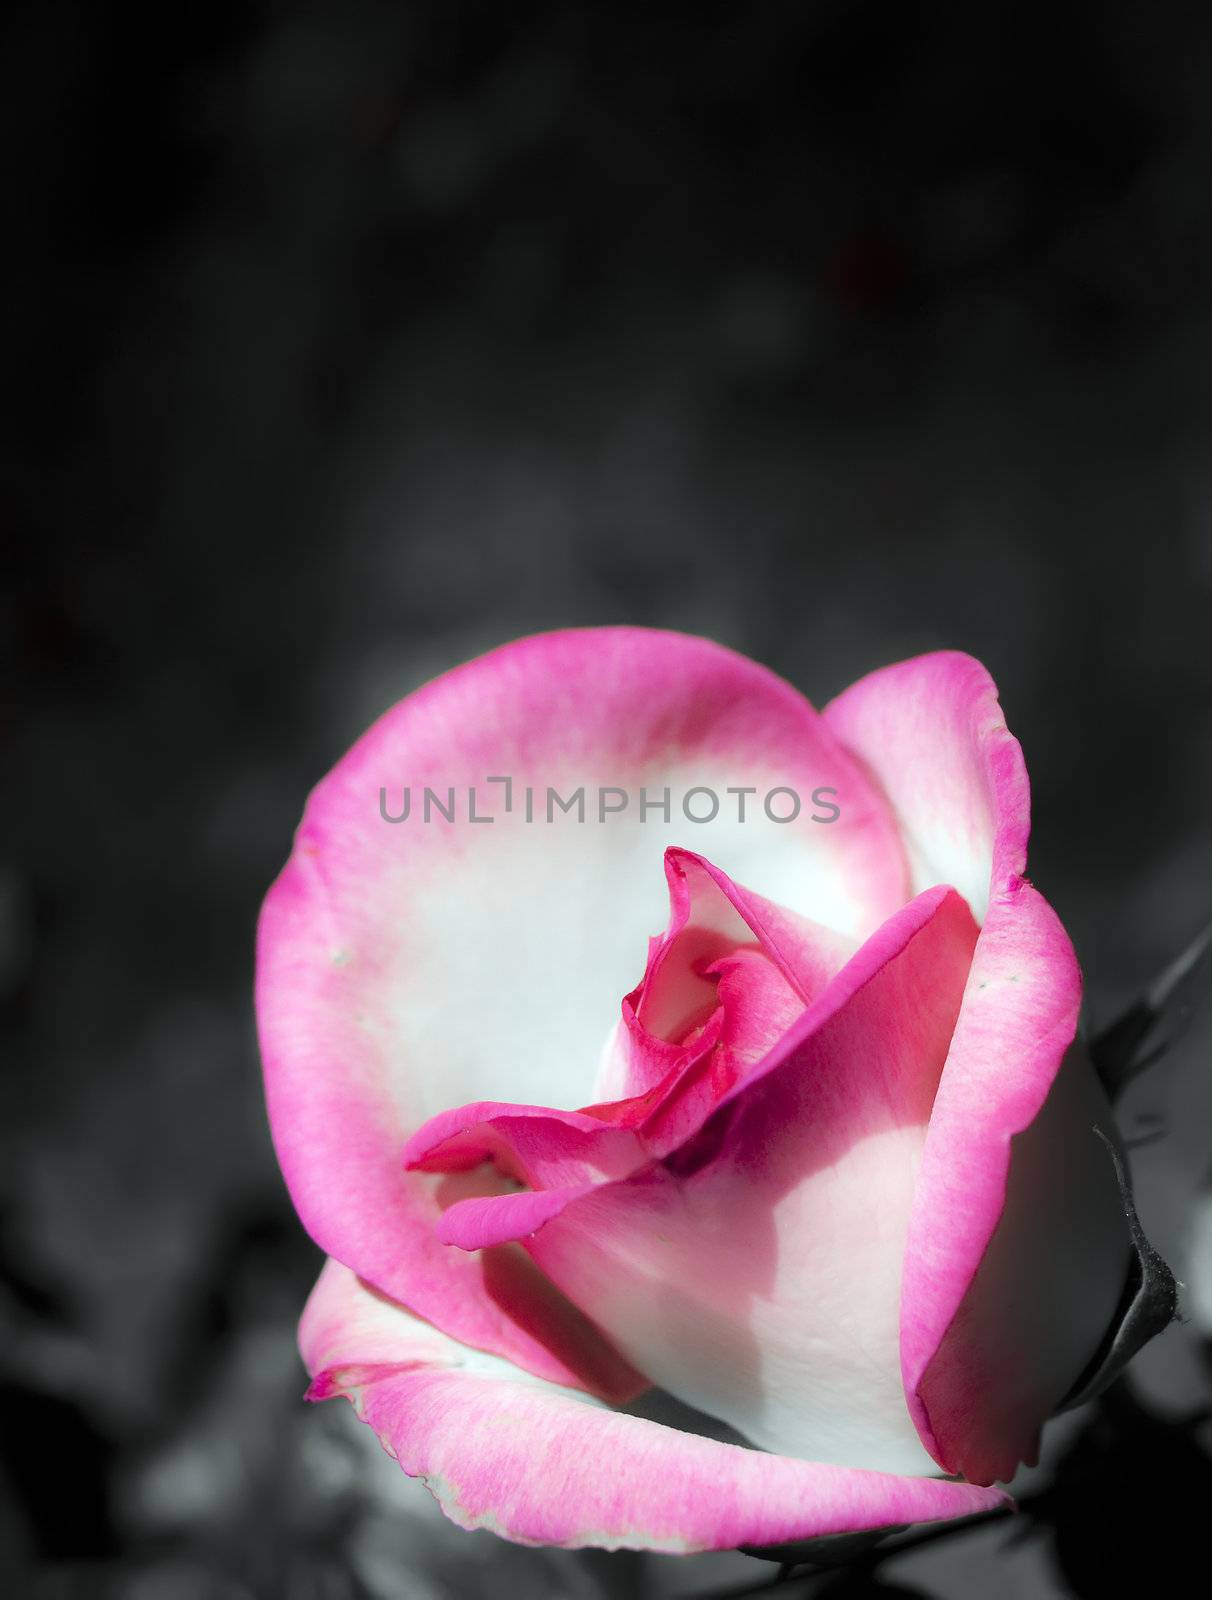 A beautiful close up of a rose over dark background